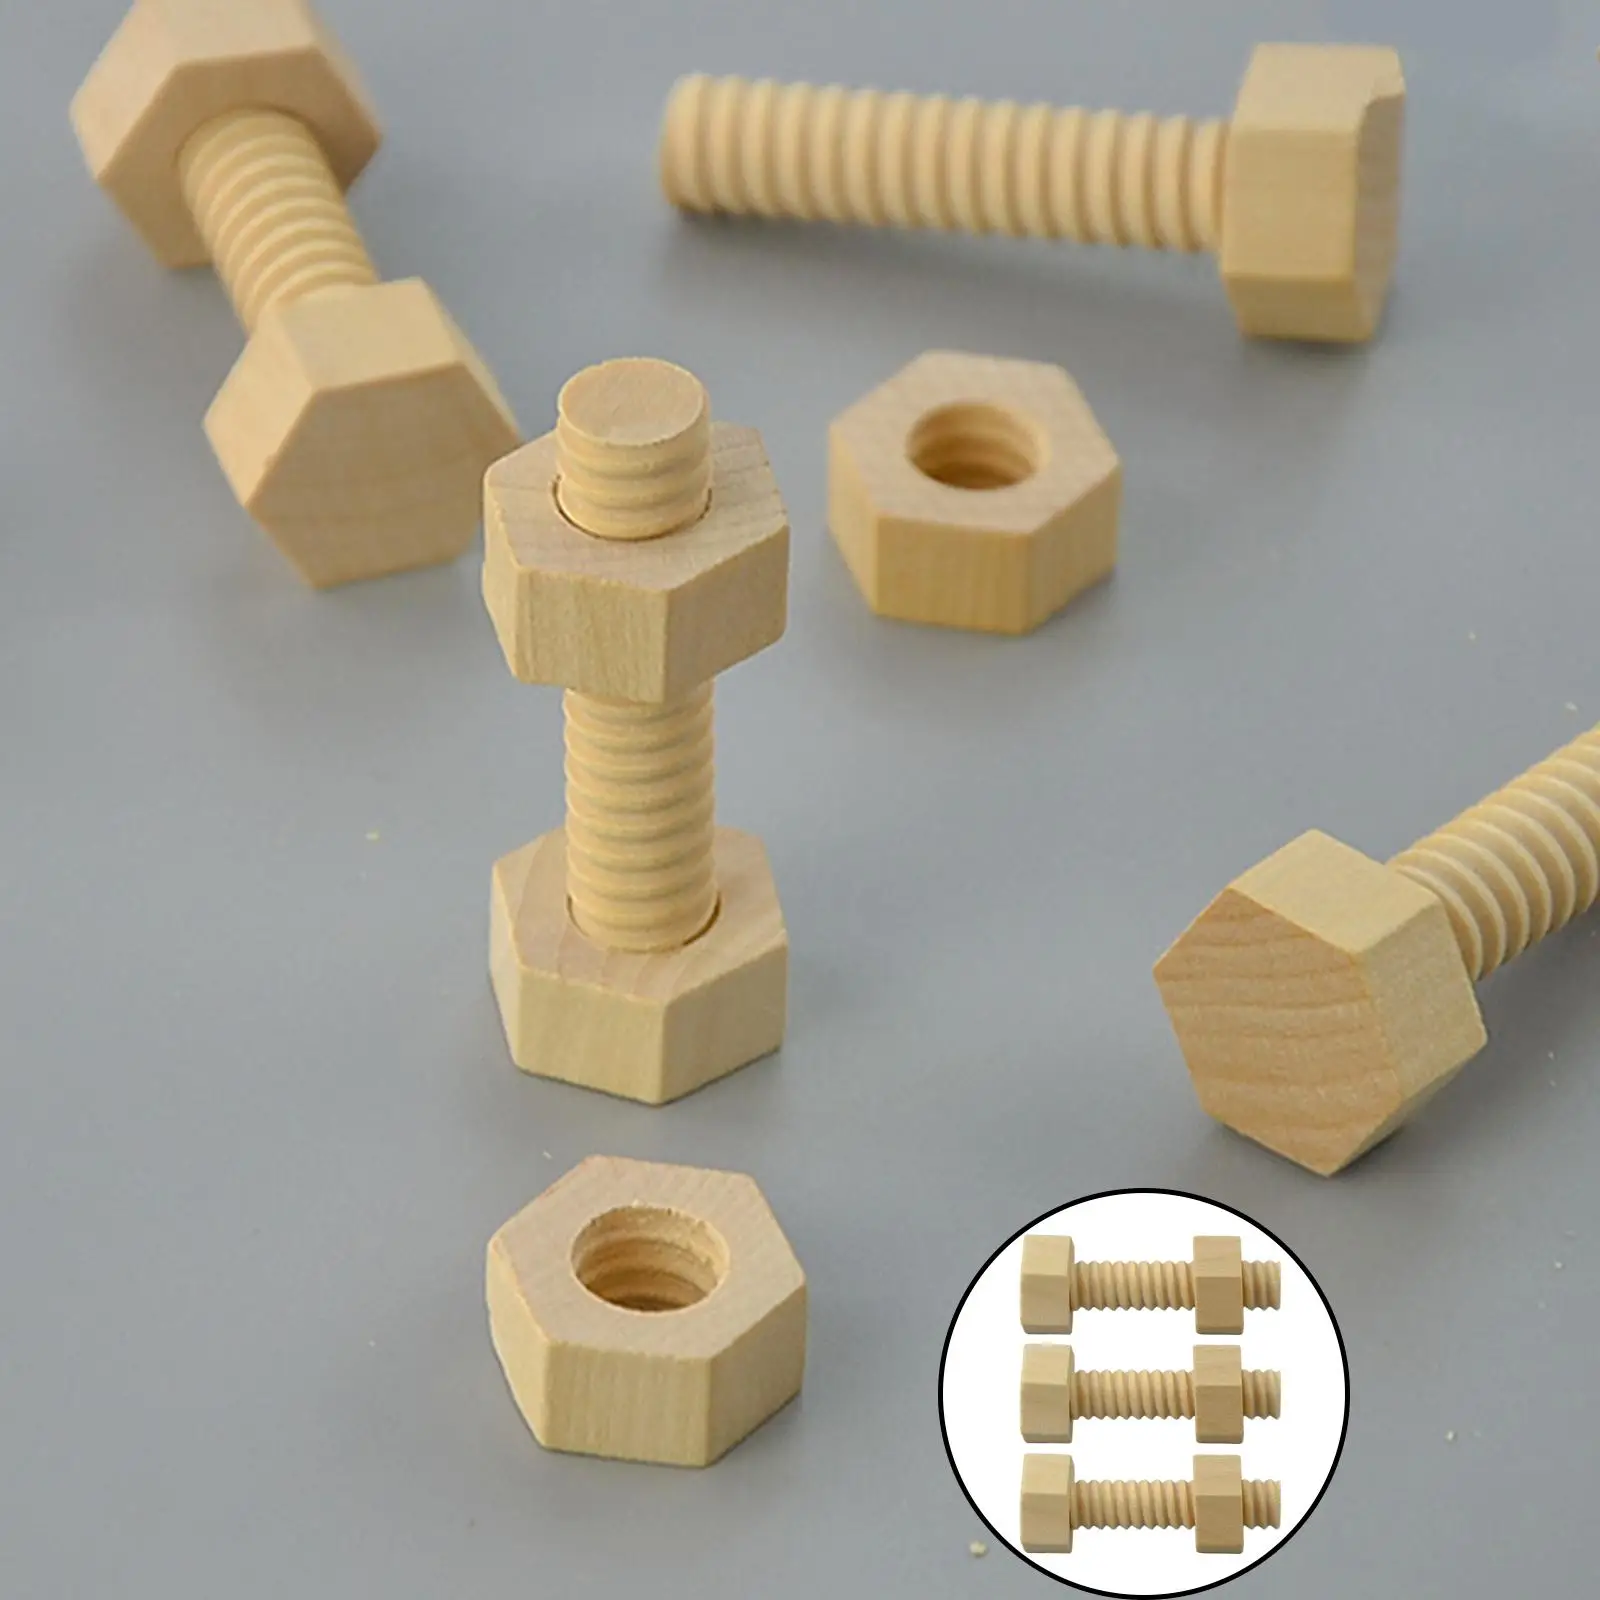 Screw Nut Assembly Toy Montessori Hands-on Building Block Accs for